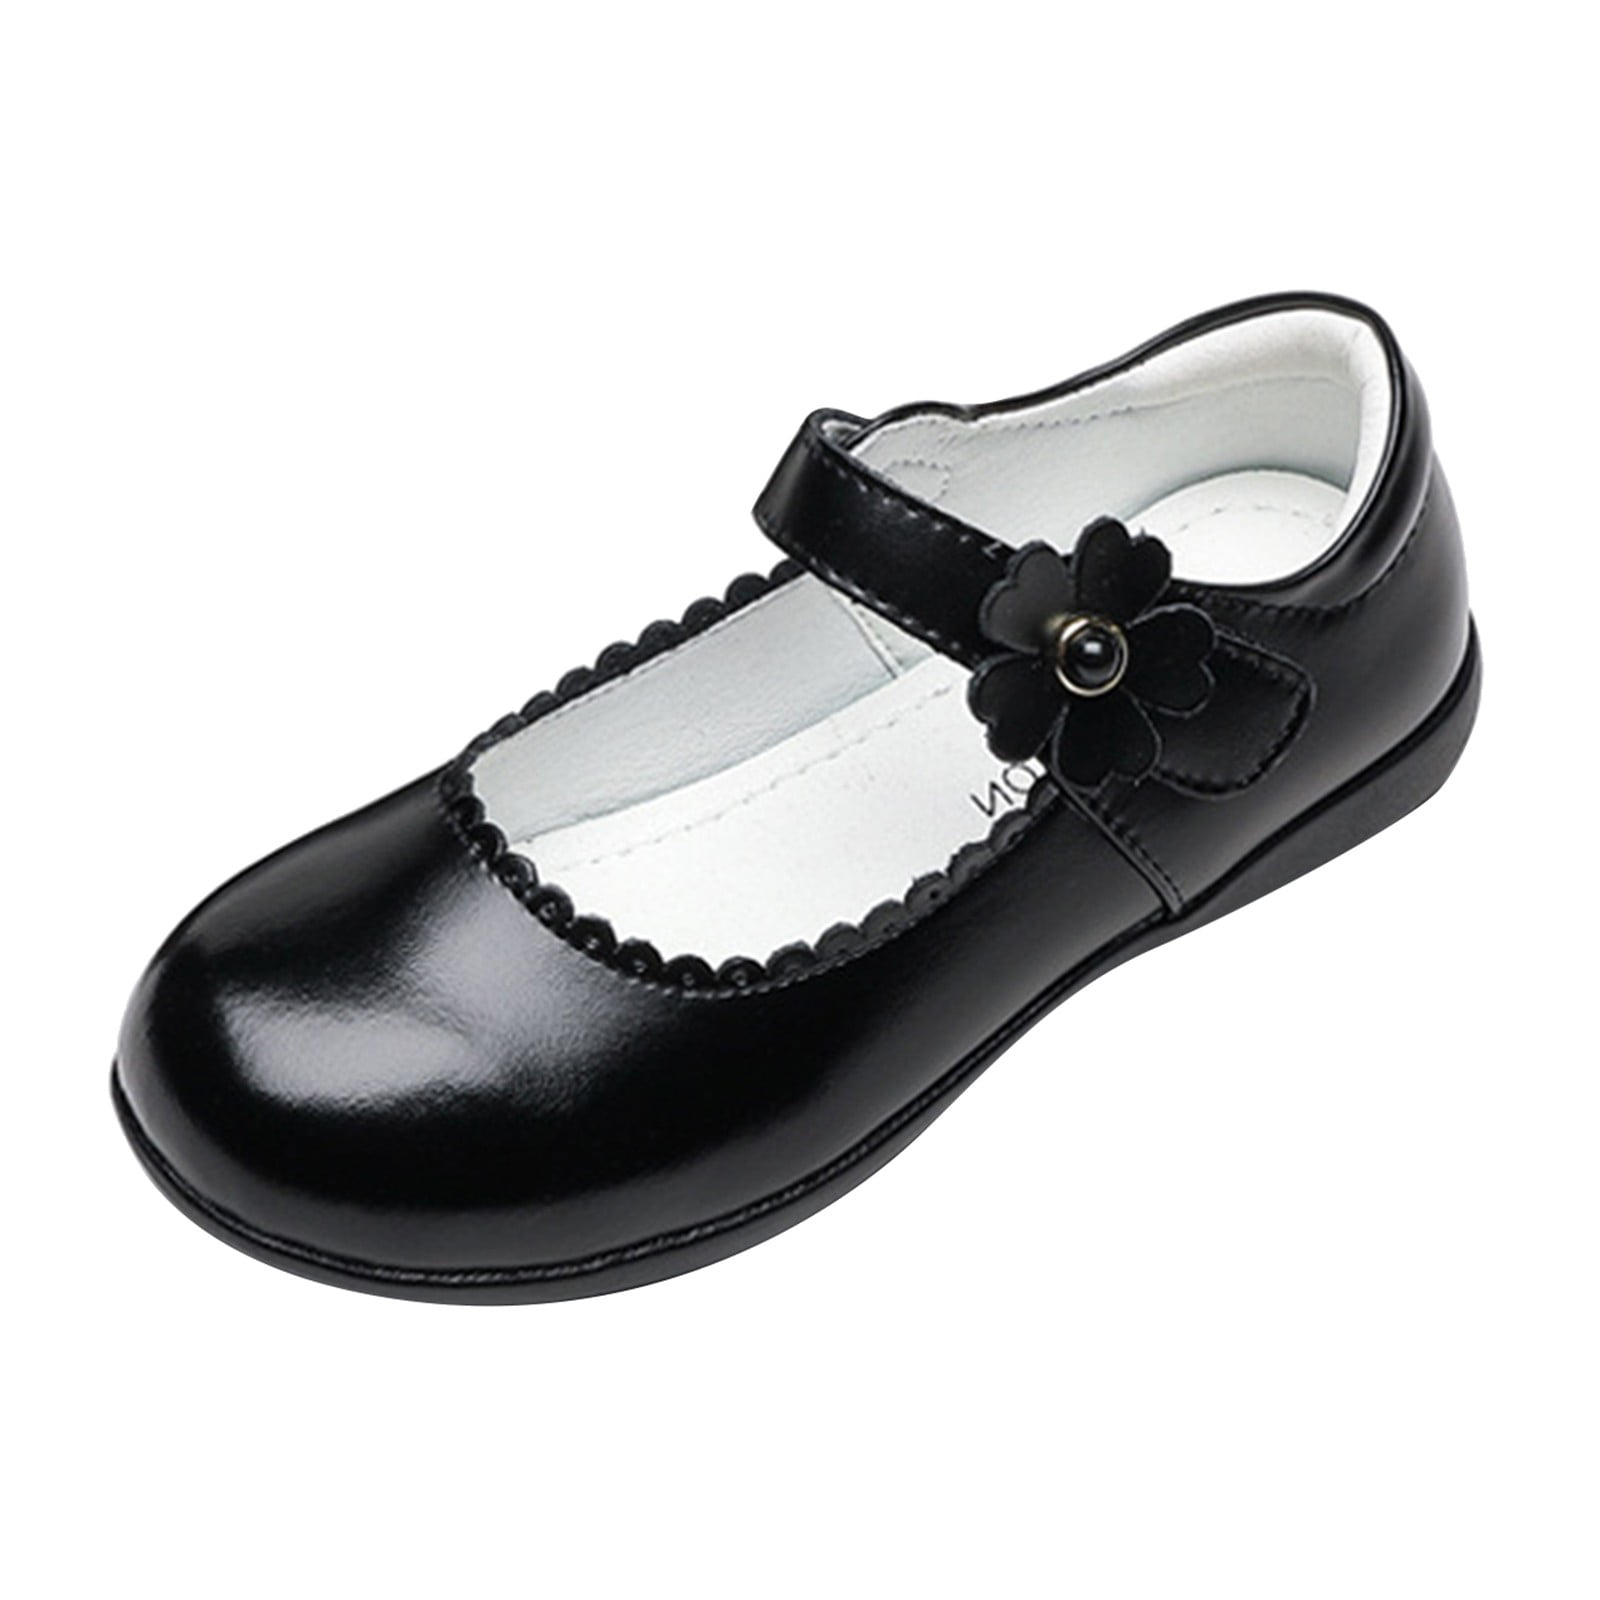 JDEFEG Shoes for Girls Size 5 Children Small Leather Shoes Single